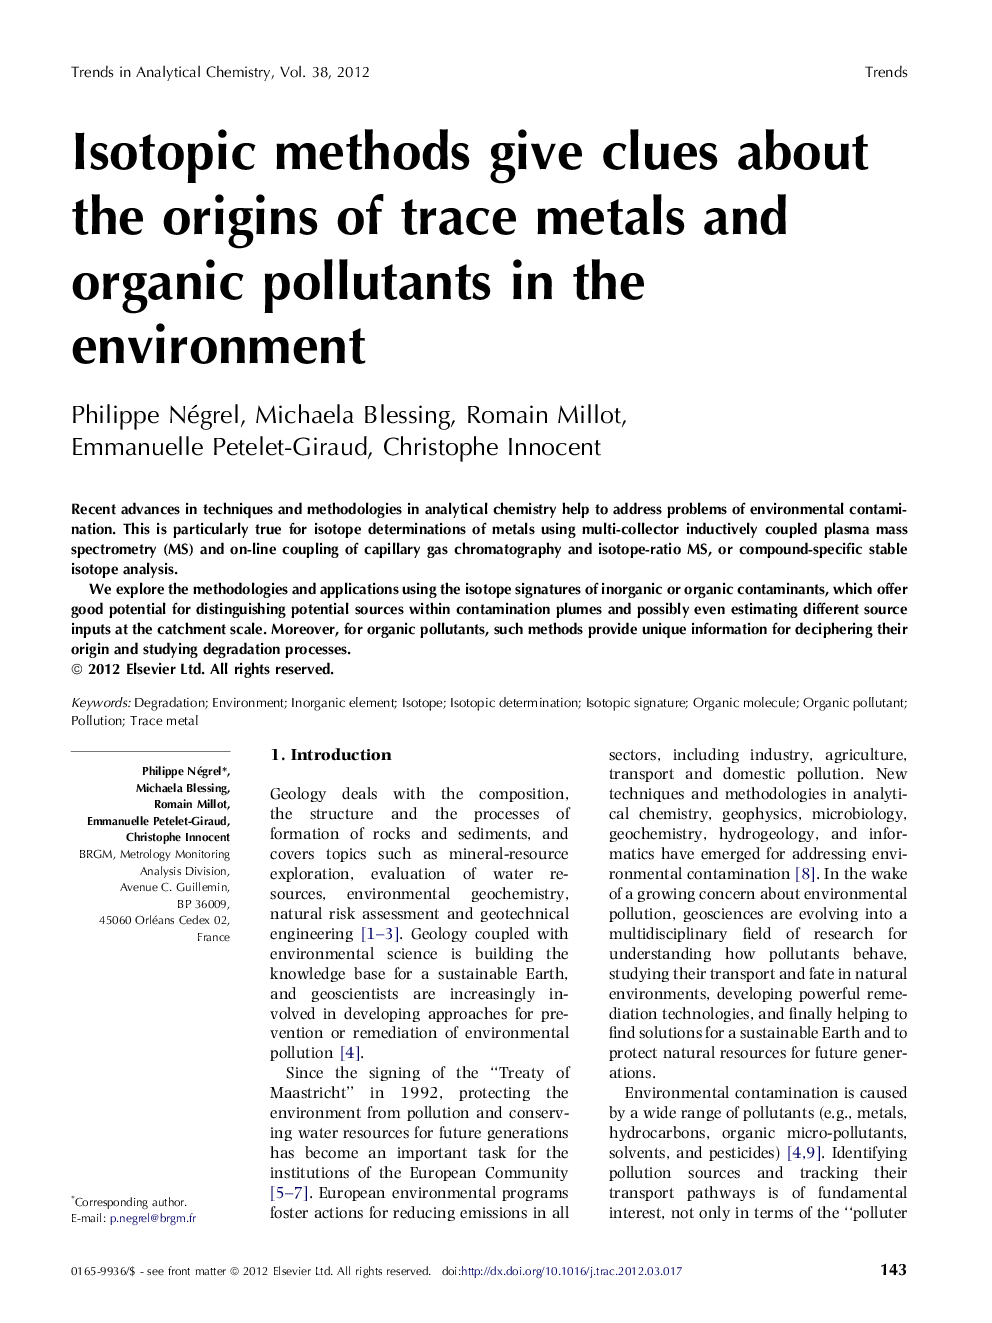 Isotopic methods give clues about the origins of trace metals and organic pollutants in the environment